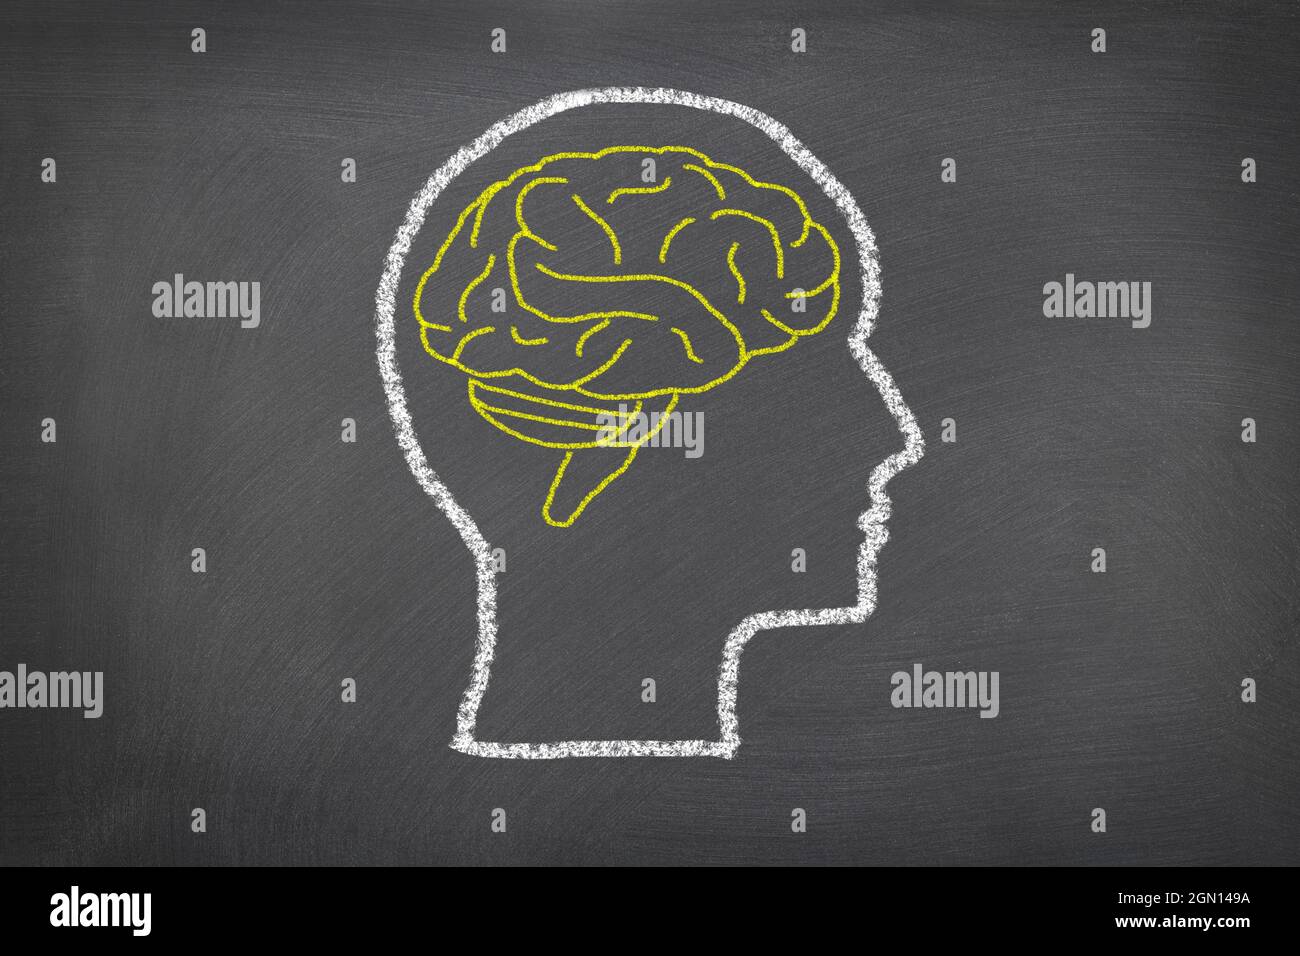 A chalk sketch on a blackboard of a human head and brain for use as any science theme or consideration of how humans think. Stock Photo